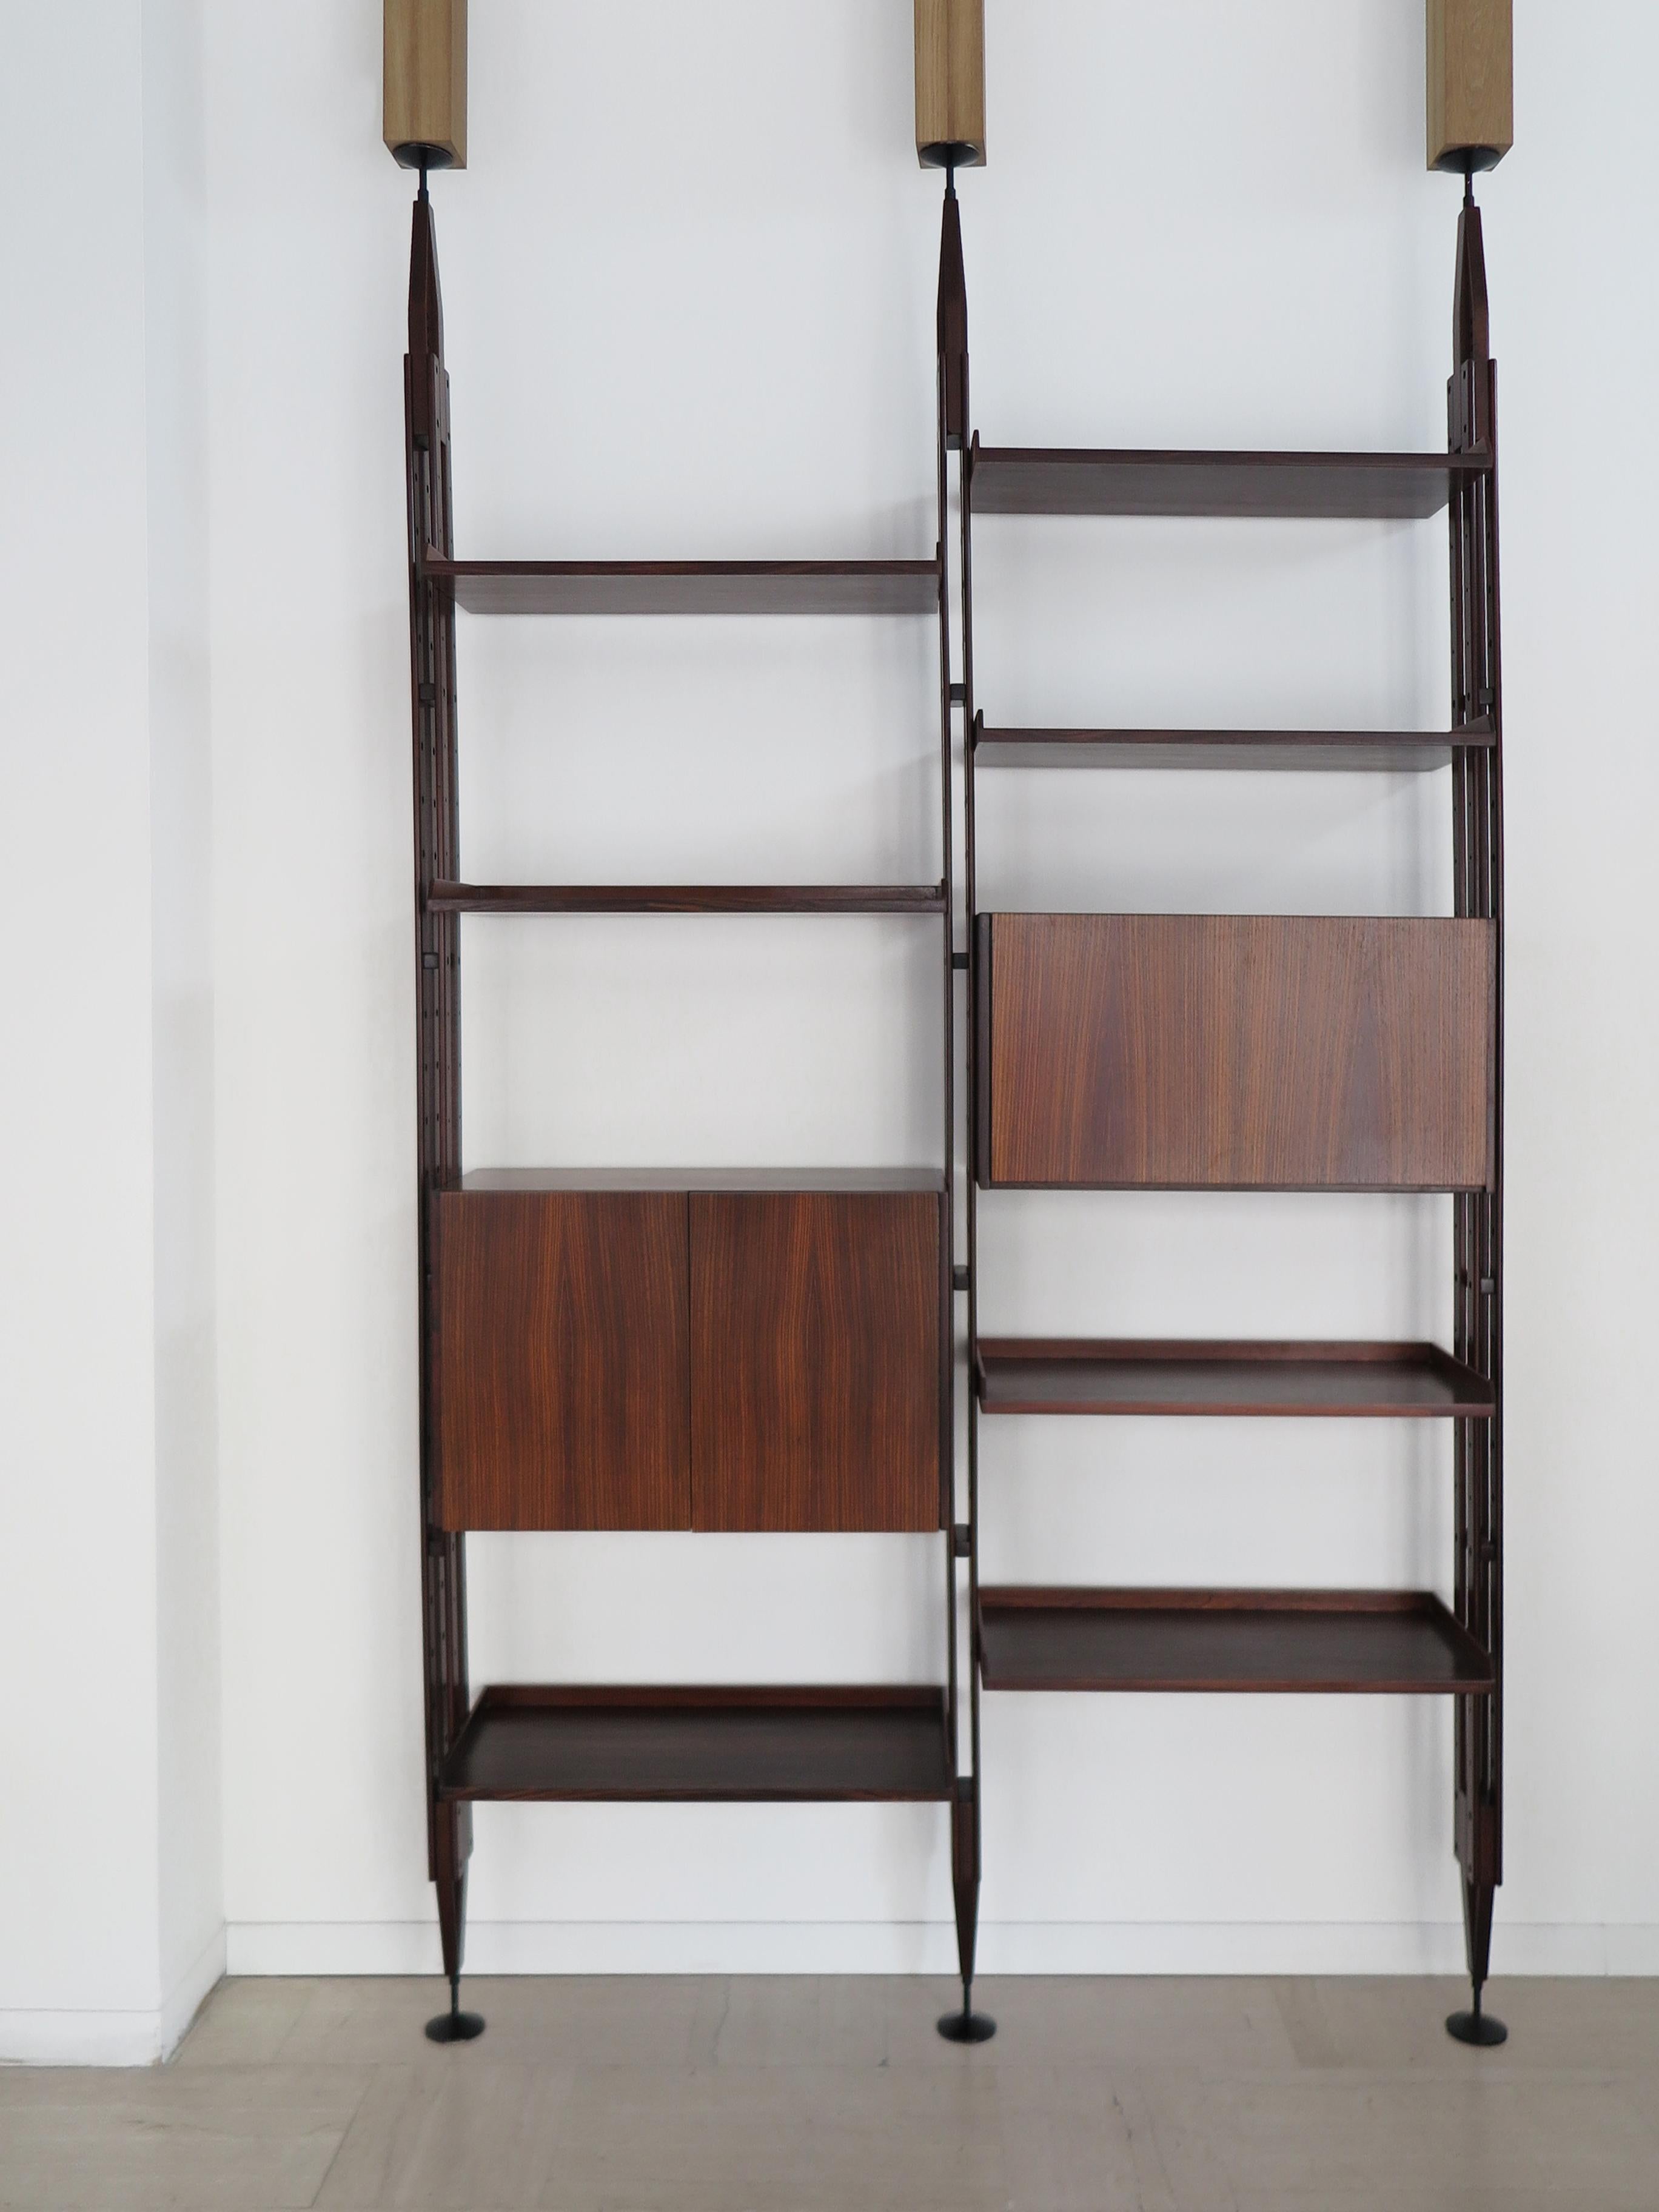 Italian dark wood shelves bookcase with floor and ceiling uprights, designed by Franco Albini in 1956 for Poggi Pavia, shelves and container with wood veneer adjustable in height and with uprights attached to solid wood floor and ceiling, Italy